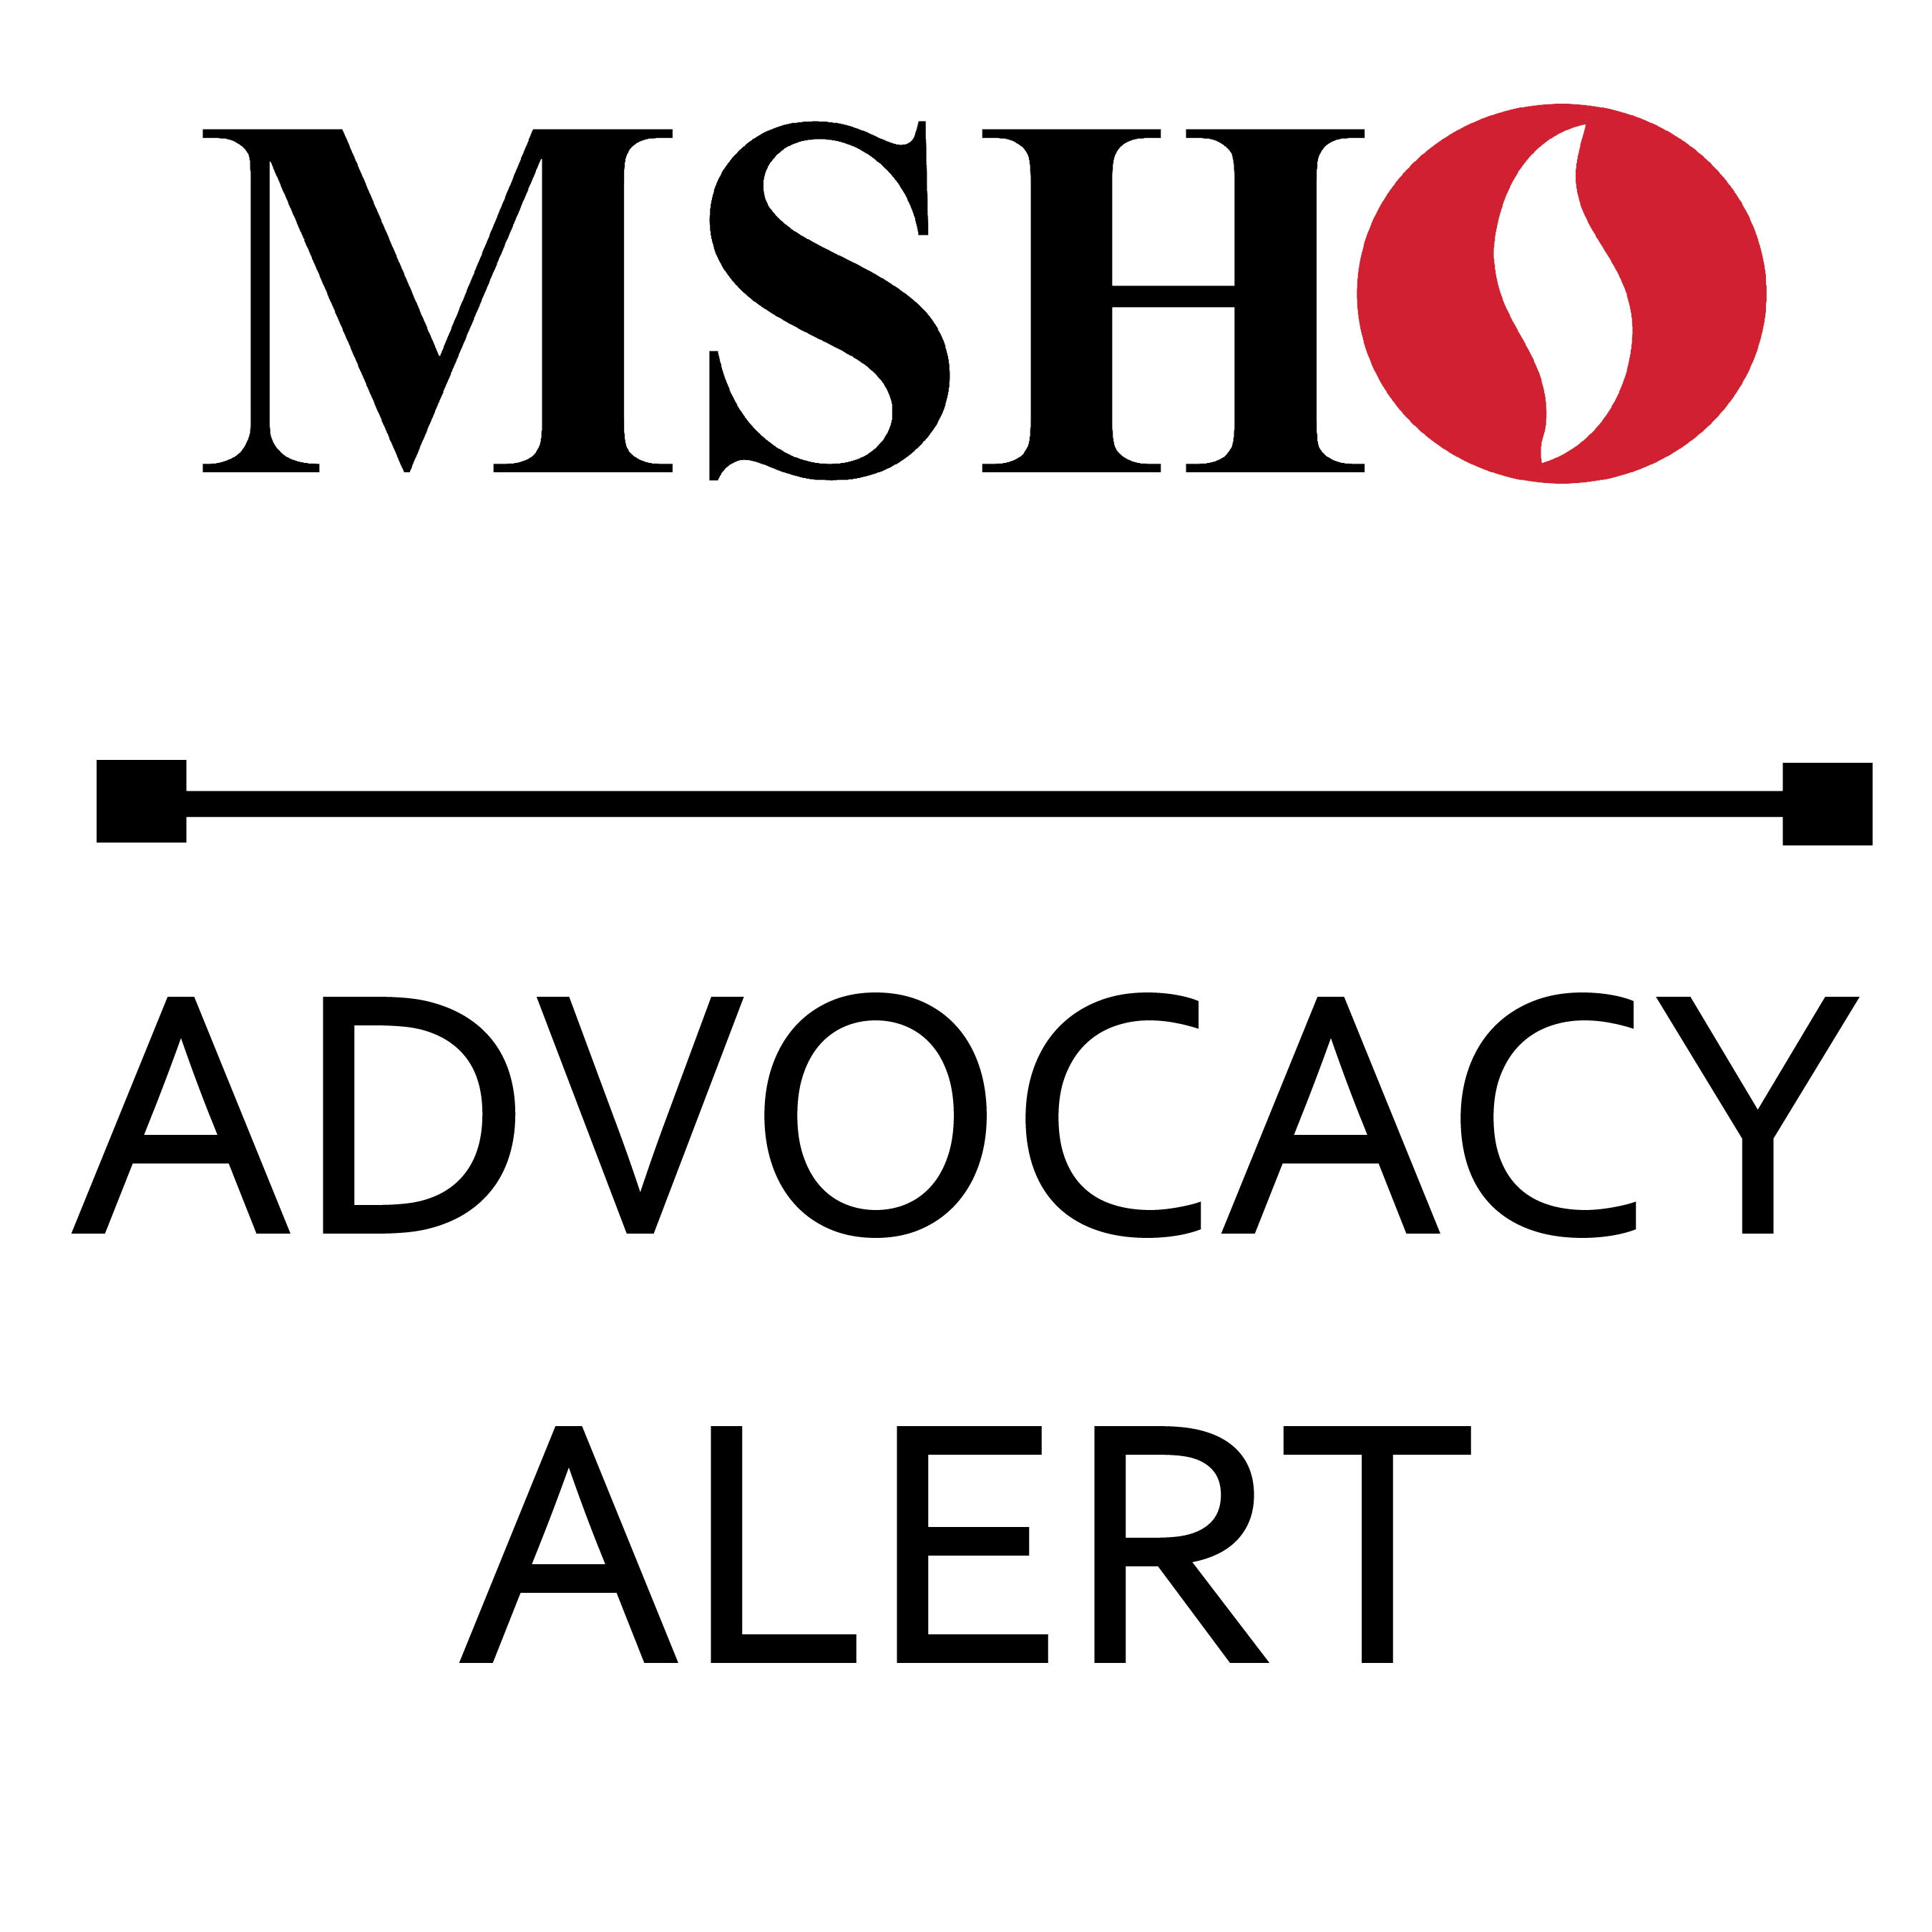 MSHO's Position Statement on Maternal Health